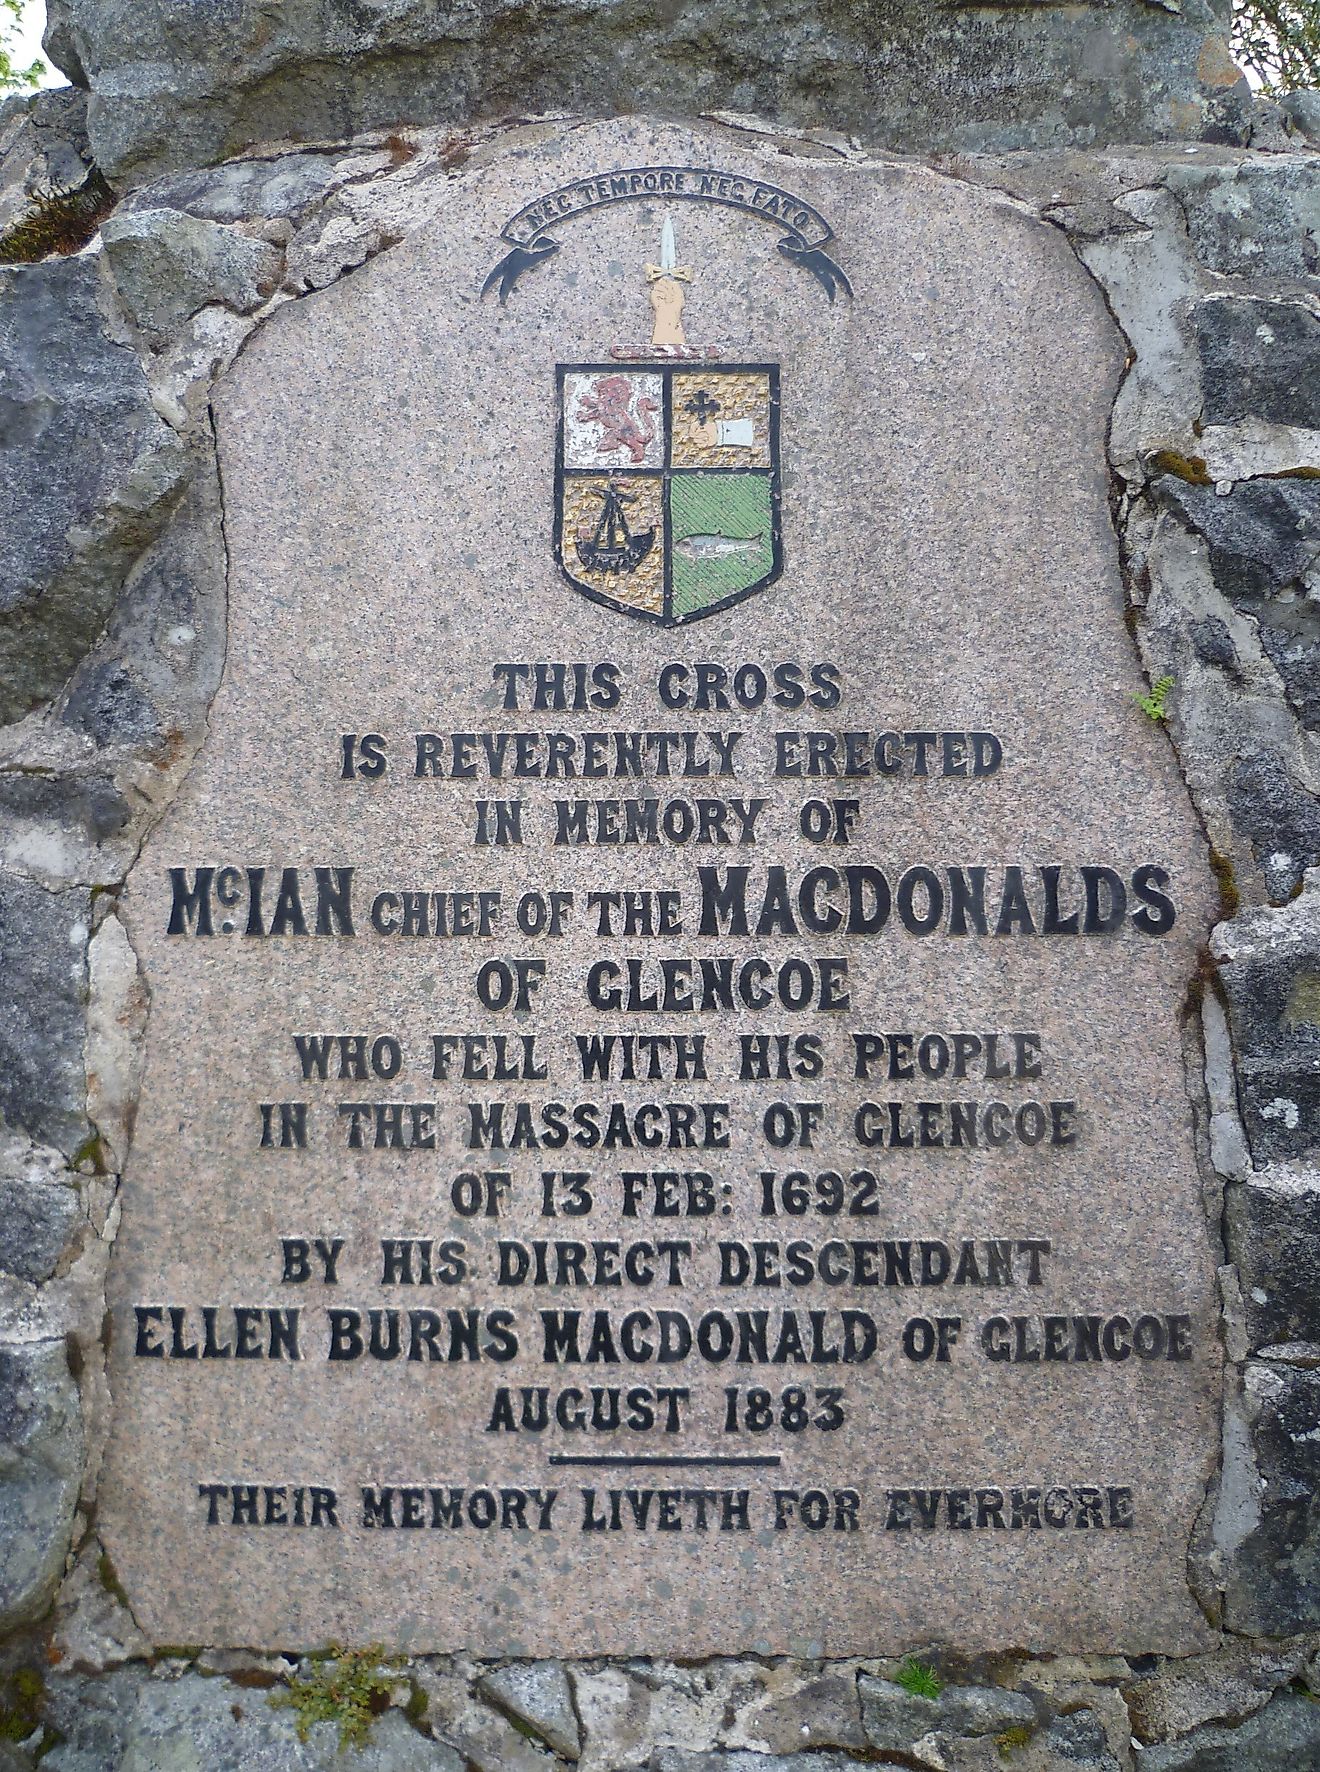 The feud started as small arguments involving cattle but culminated when the MacDonalds refused to give an oath of loyalty to the British flag in 1692. Image credit: highlandtitles.com